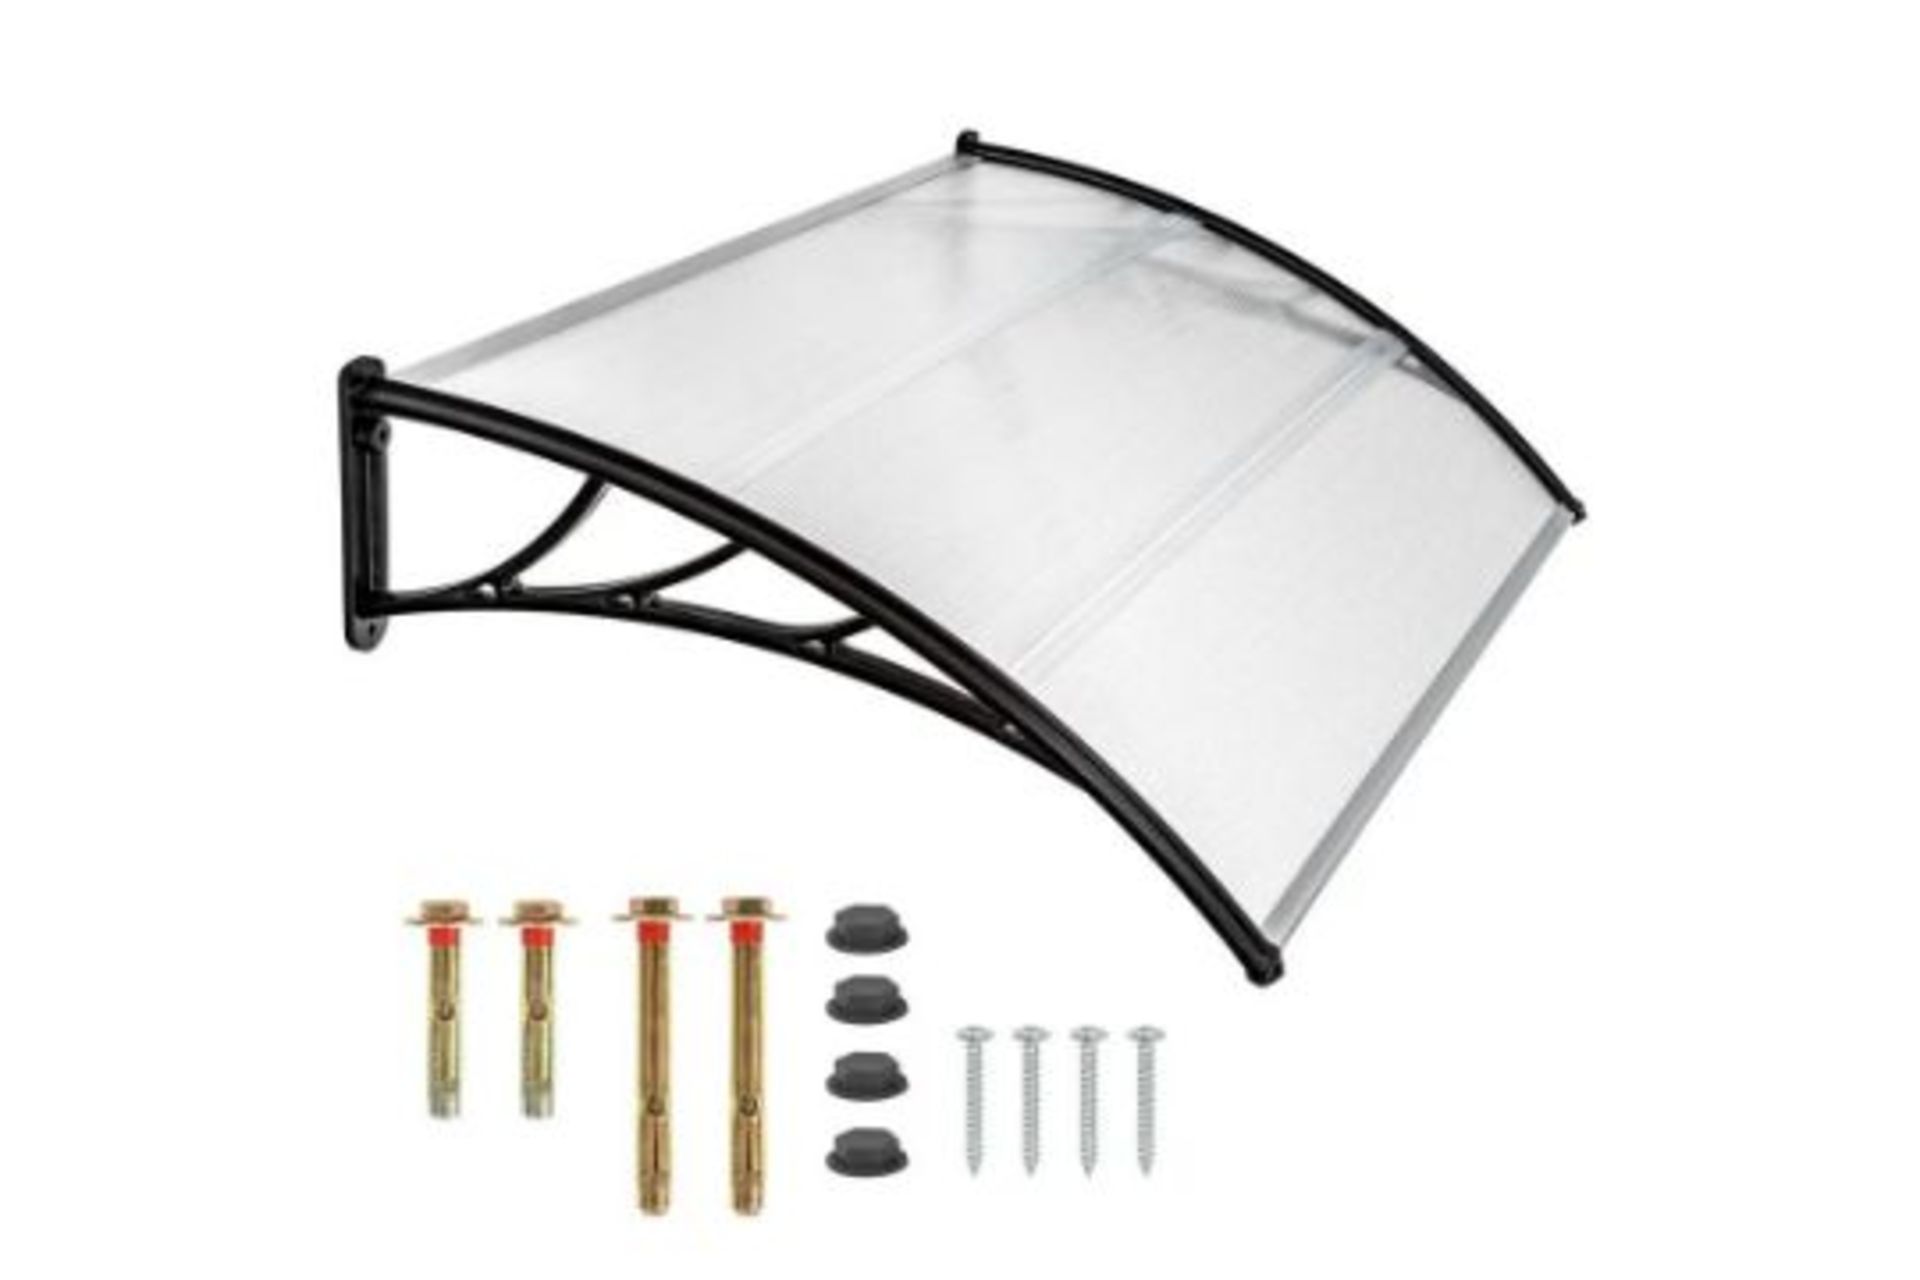 Canopy transparent 120 cm. - PW. RRP £139.99. You won’t be left standing in the rain with this